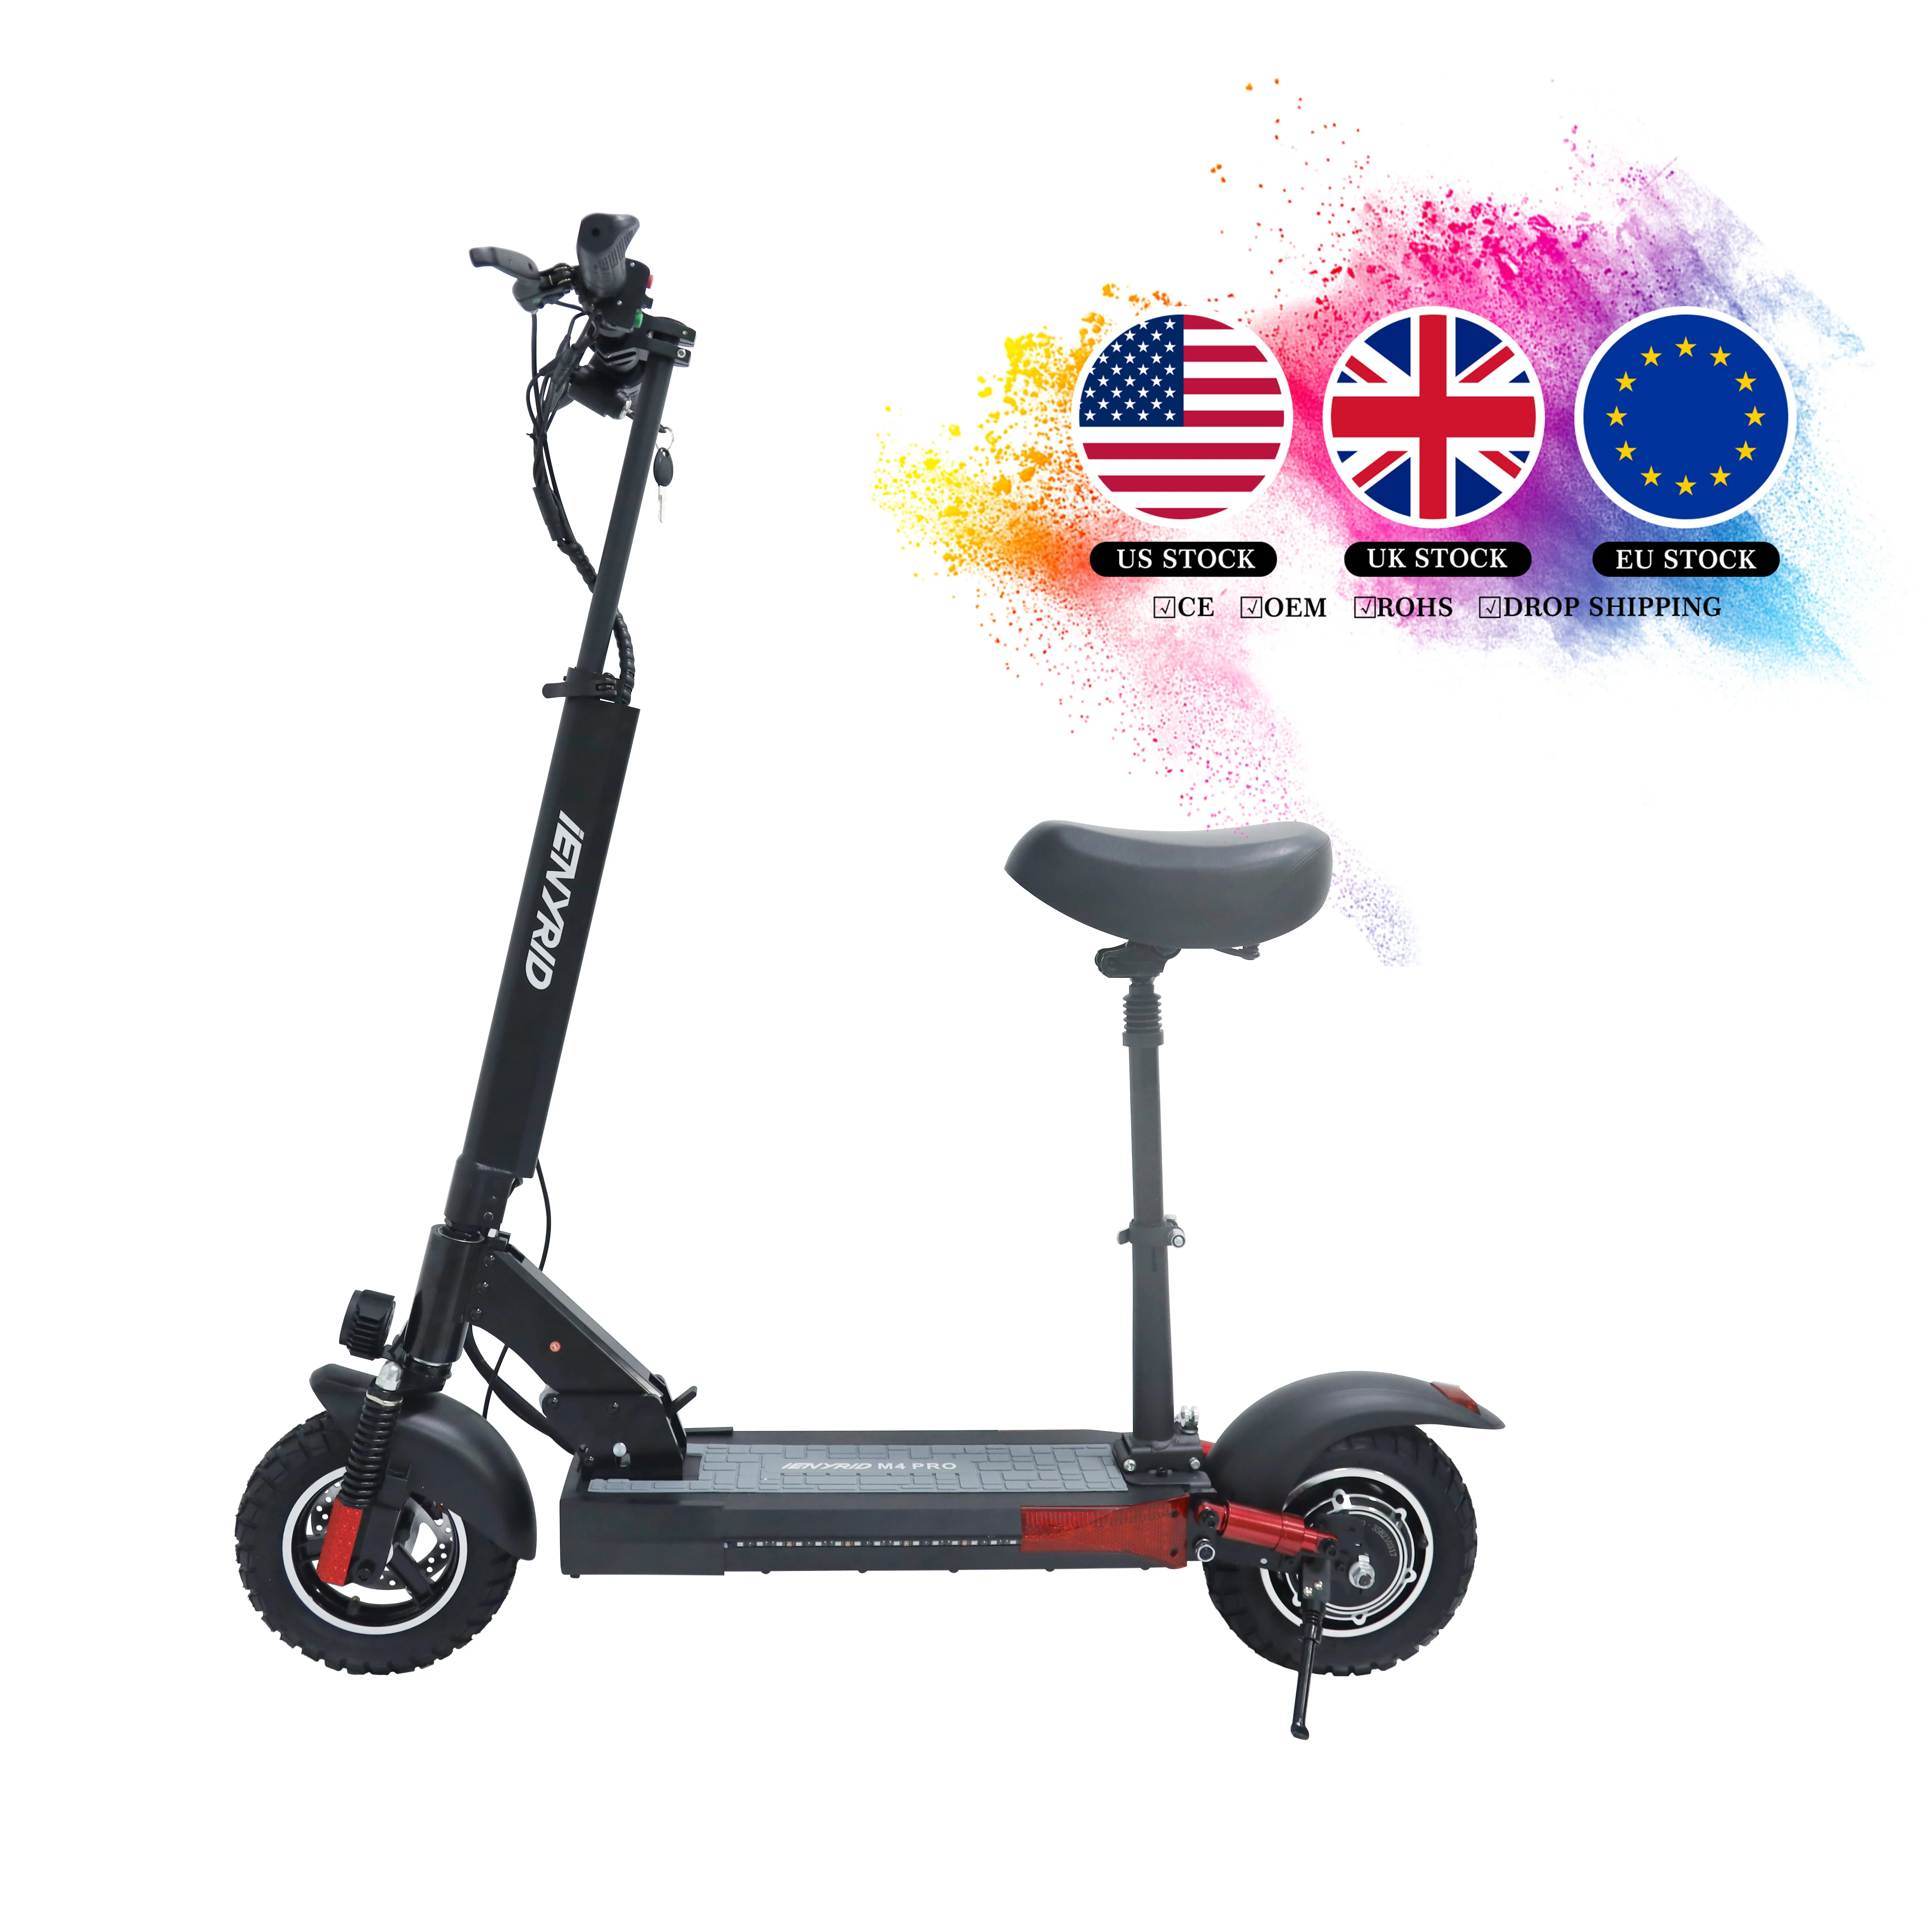 

(EU UK US STOCK) Original quality electric scooter iENYRID M4 Pro foldable scooter 48V 16AH 500W for adult in EU UK US Warehouse, Black+red